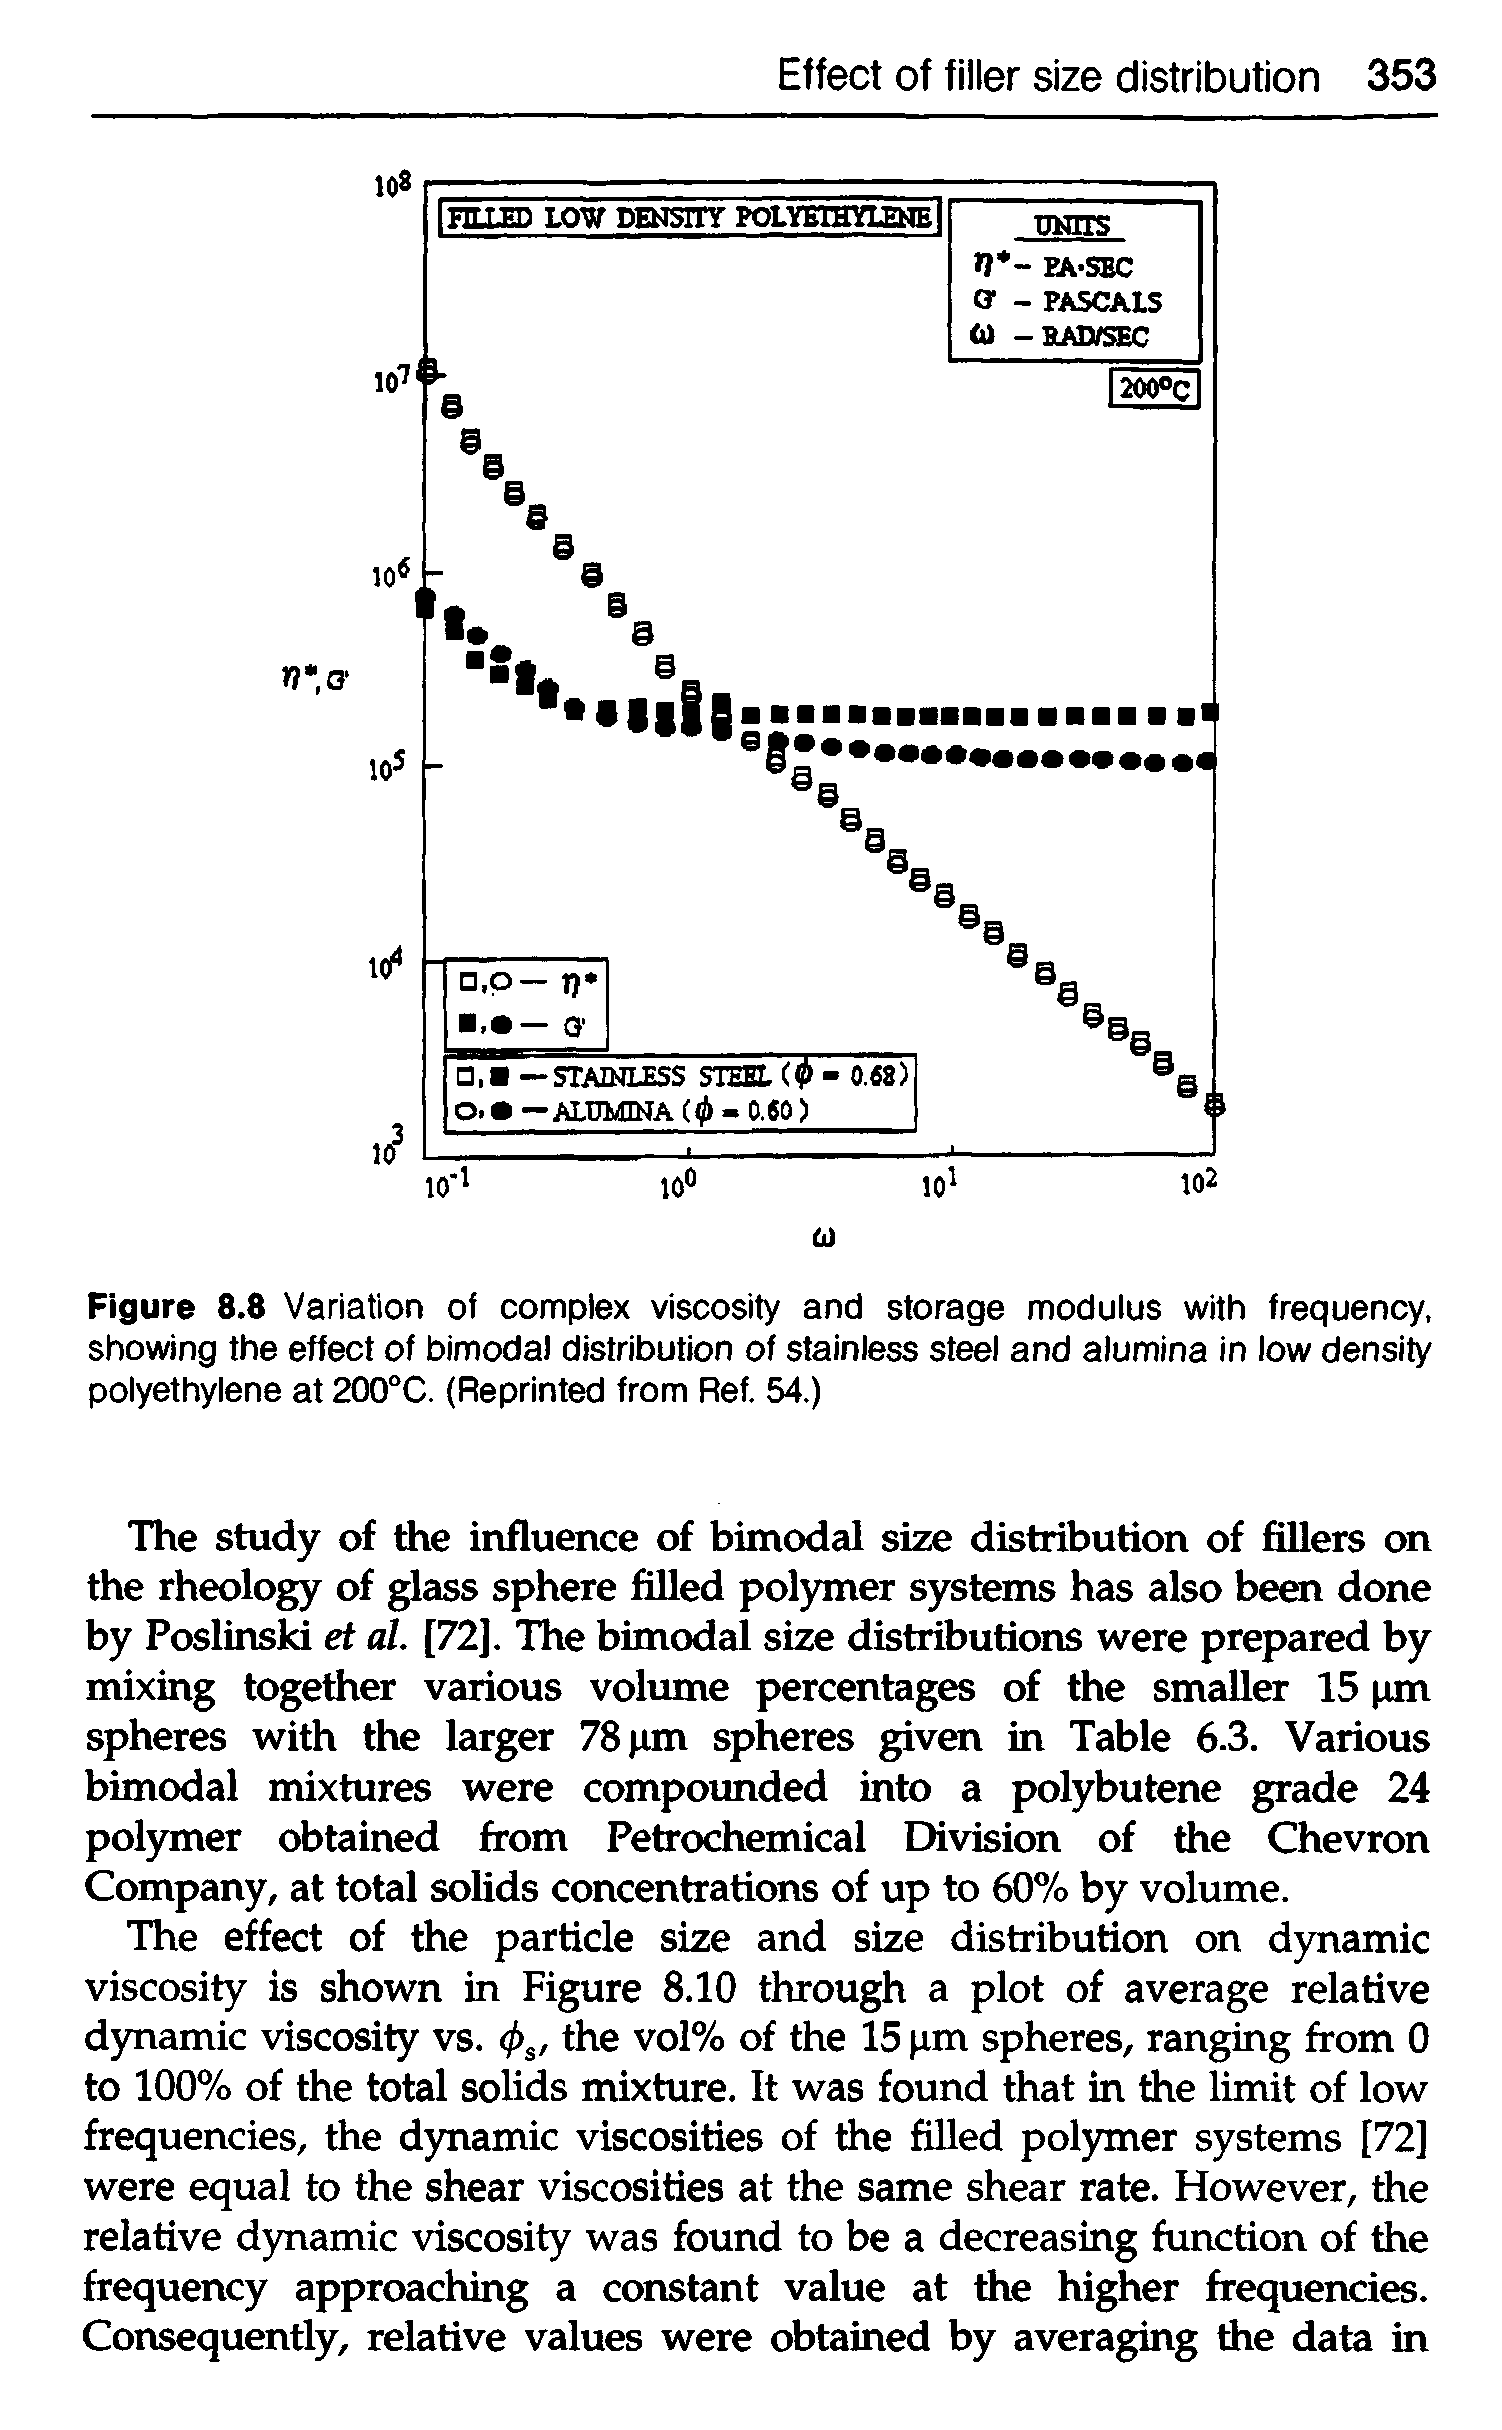 Figure 8.8 Variation of complex viscosity and storage modulus with frequency, showing the effect of bimodal distribution of stainless steel and alumina in low density polyethylene at 200 C. (Reprinted from Ref. 54.)...